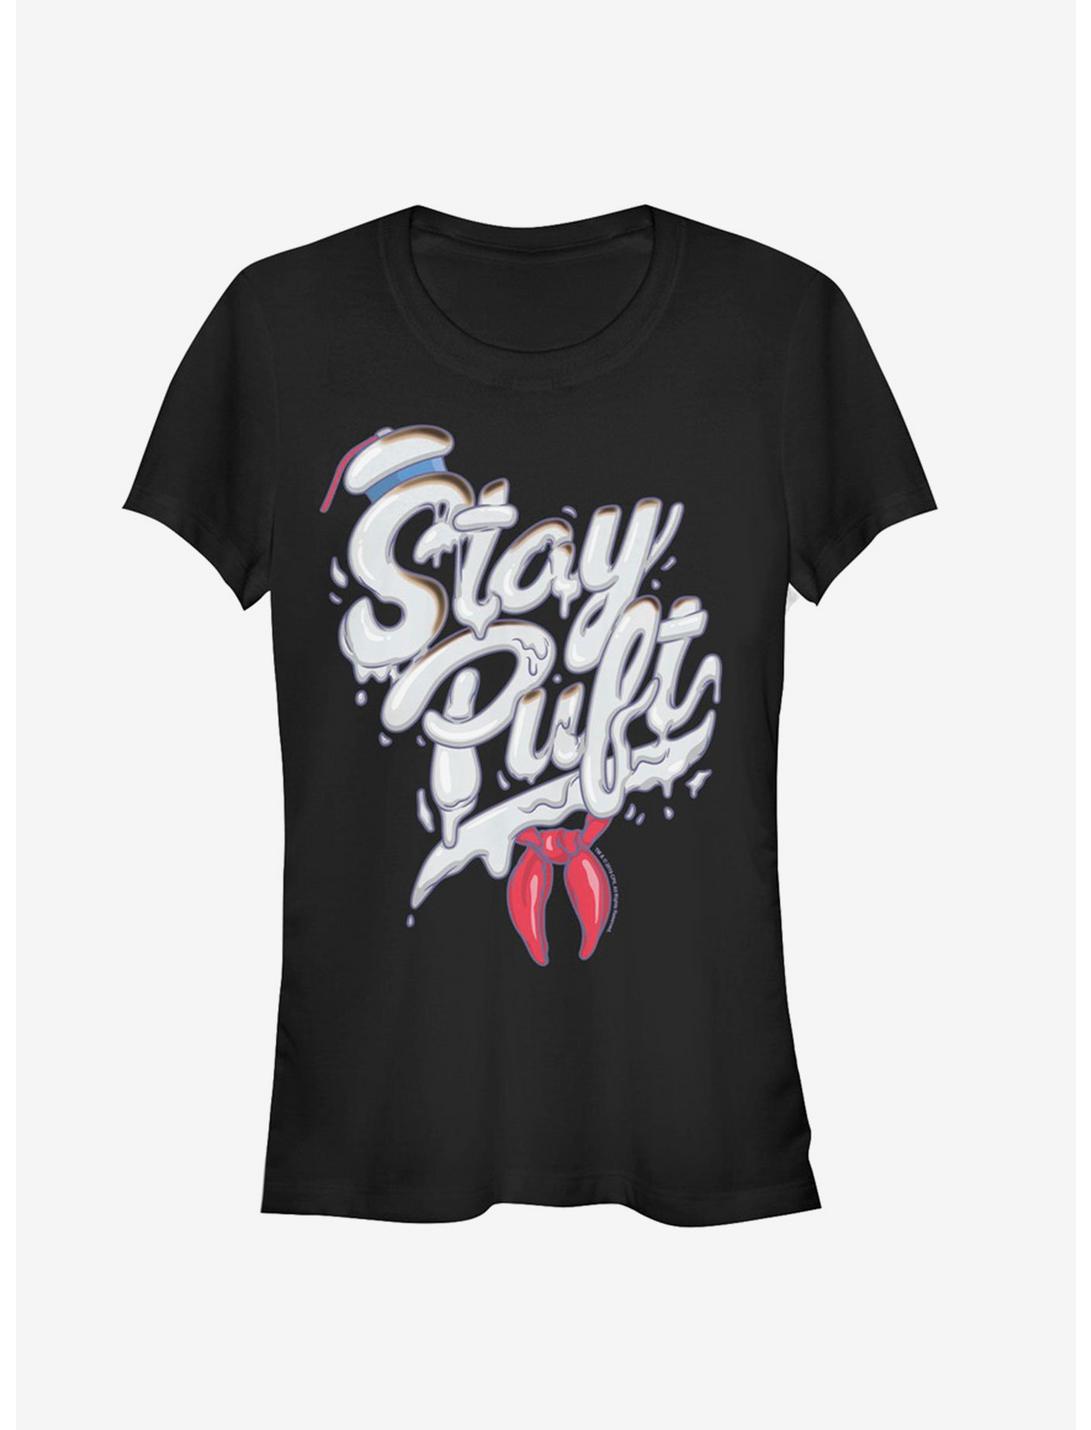 Ghostbusters Stay Puft Girls T-Shirt, BLACK, hi-res